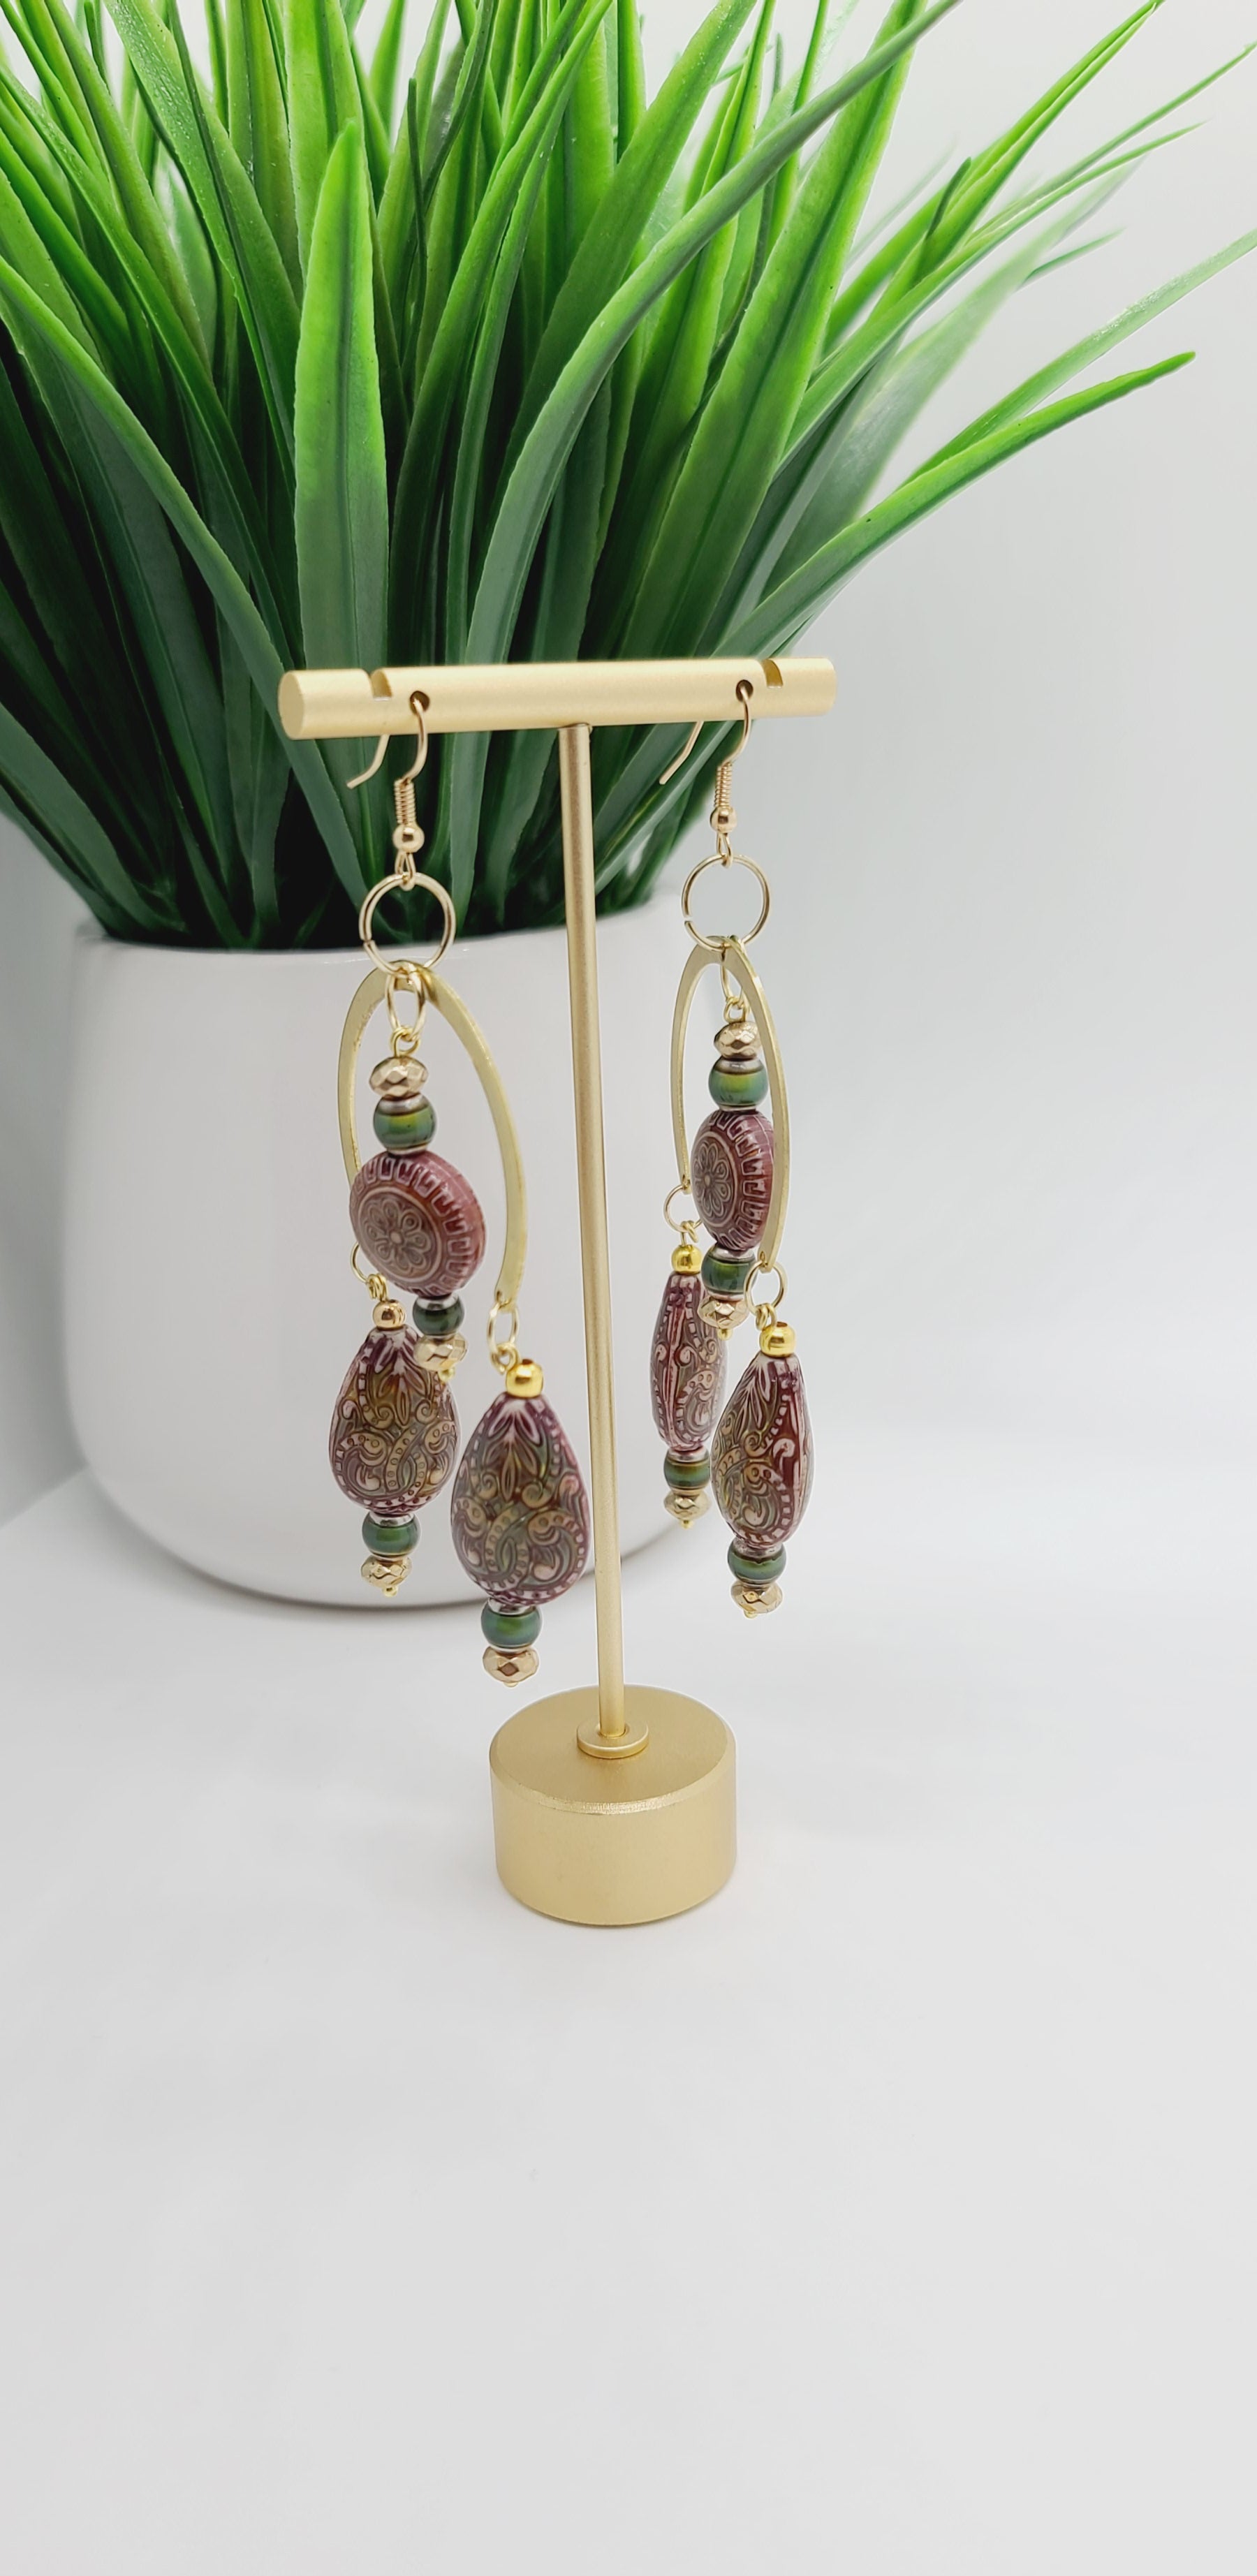 Length: 3.75 inches | Weight: 0.7 ounces  Distinctly You! These earrings are made with gold crescent moon charms, paisley printed wooden covered with resin beads, 6mm olive green resin beads, gold faceted spacers, and gold seed beads.